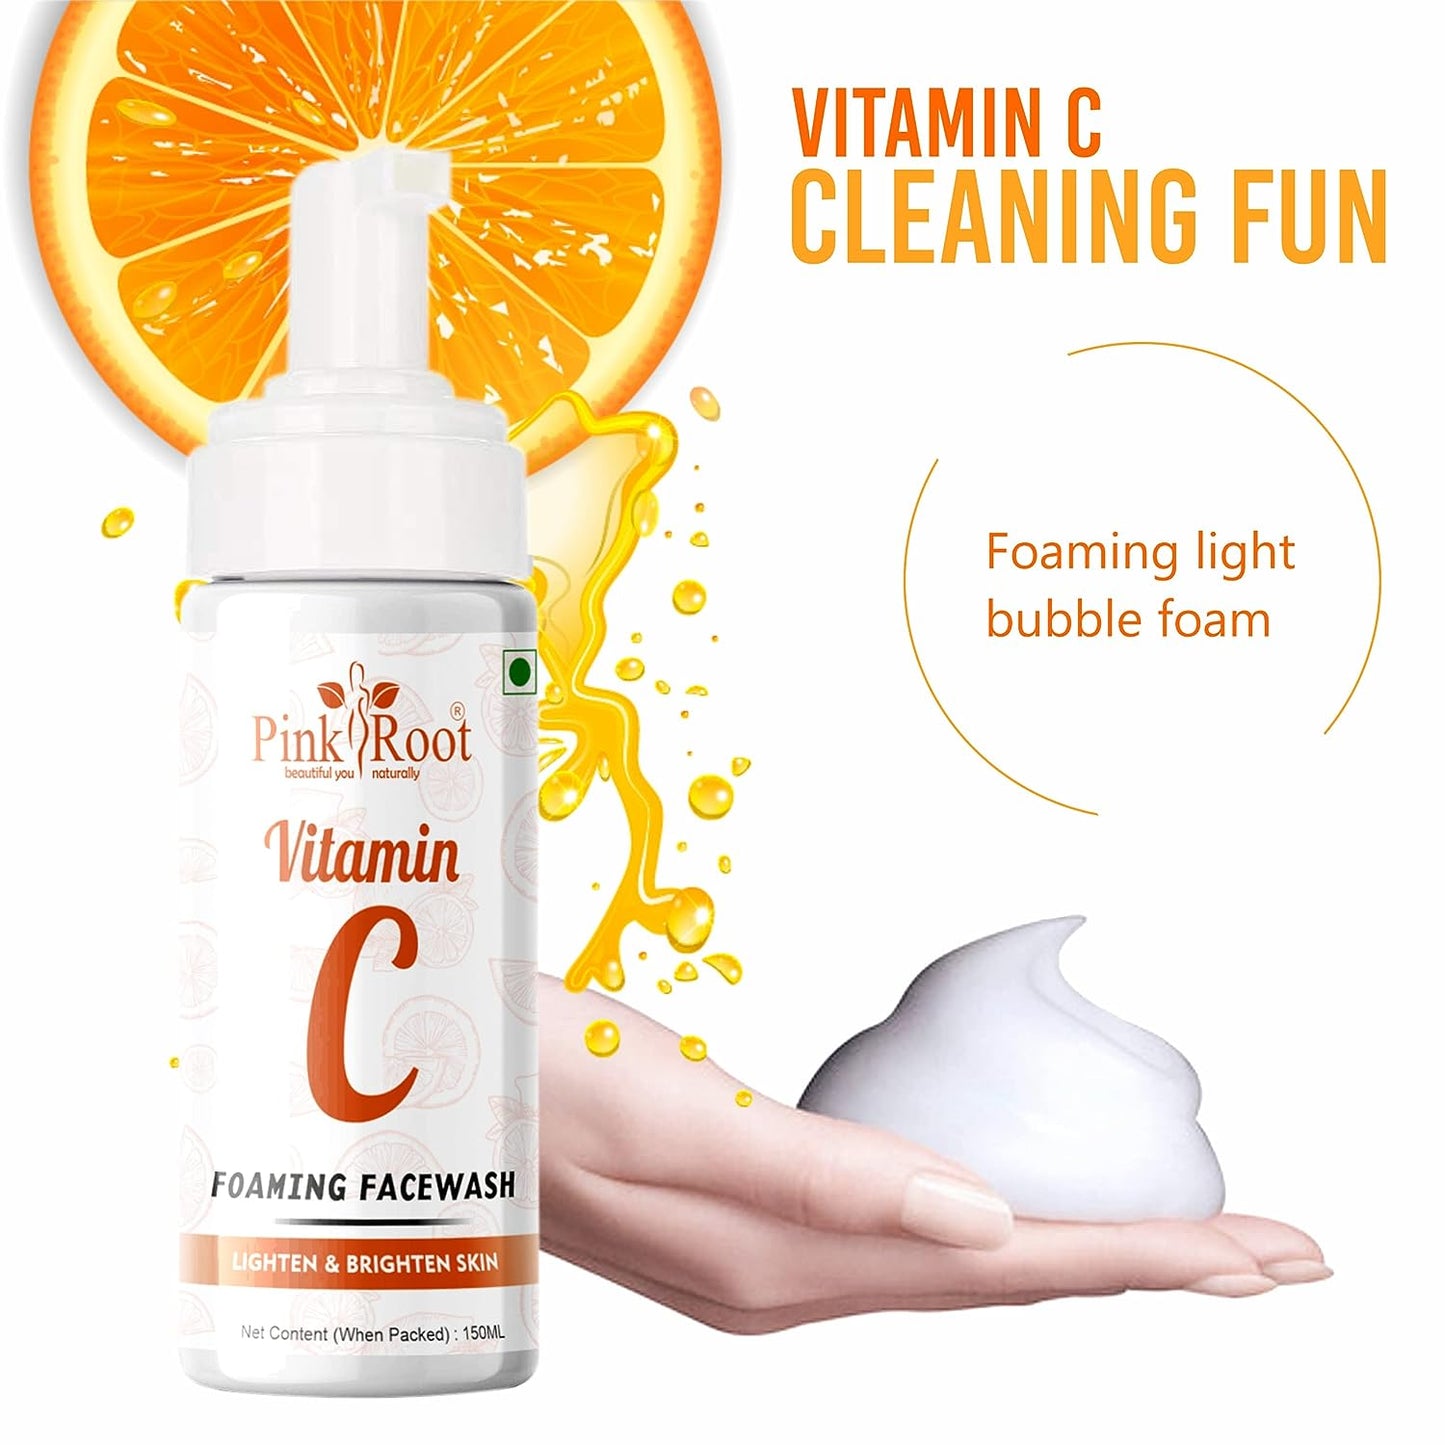 Pink Root Vitamin C Foaming Face Wash 150ml- Revitalize your skin with the power of Vitamin C, leaving it refreshed, radiant, and ready to glow with health and vitality